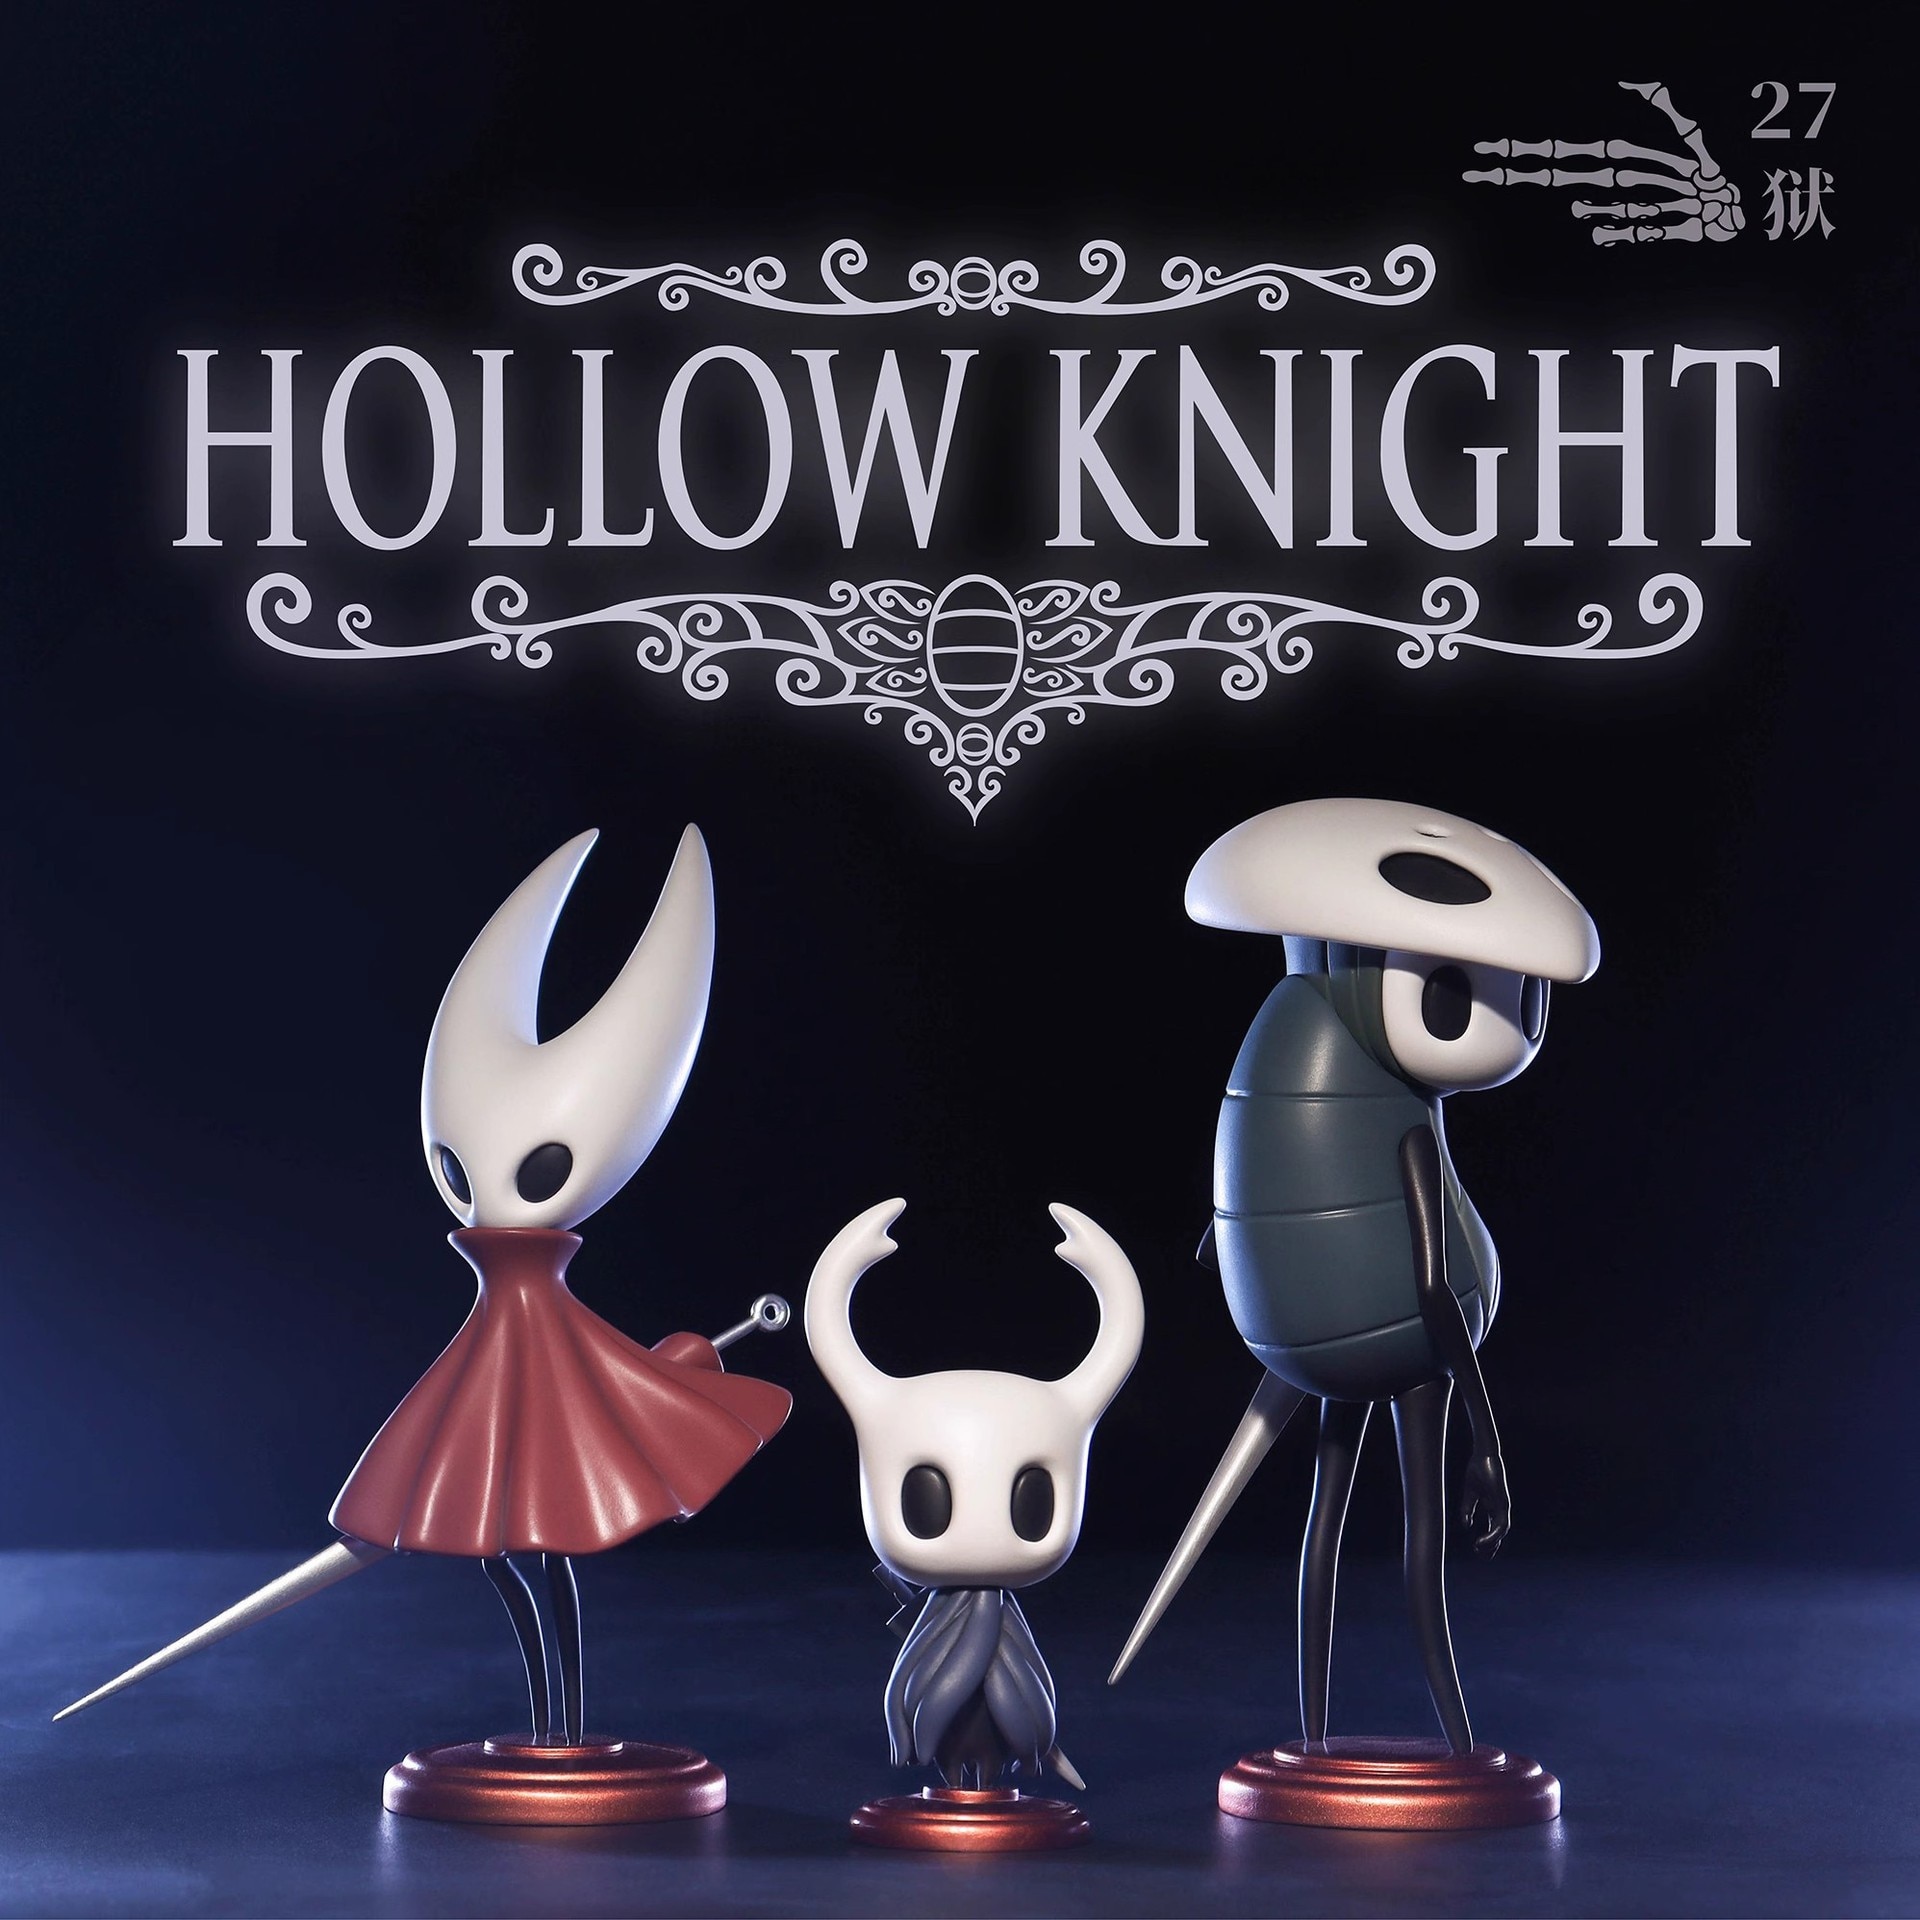 3 pieces/set of hollow knight toys, animated games, character knights ...